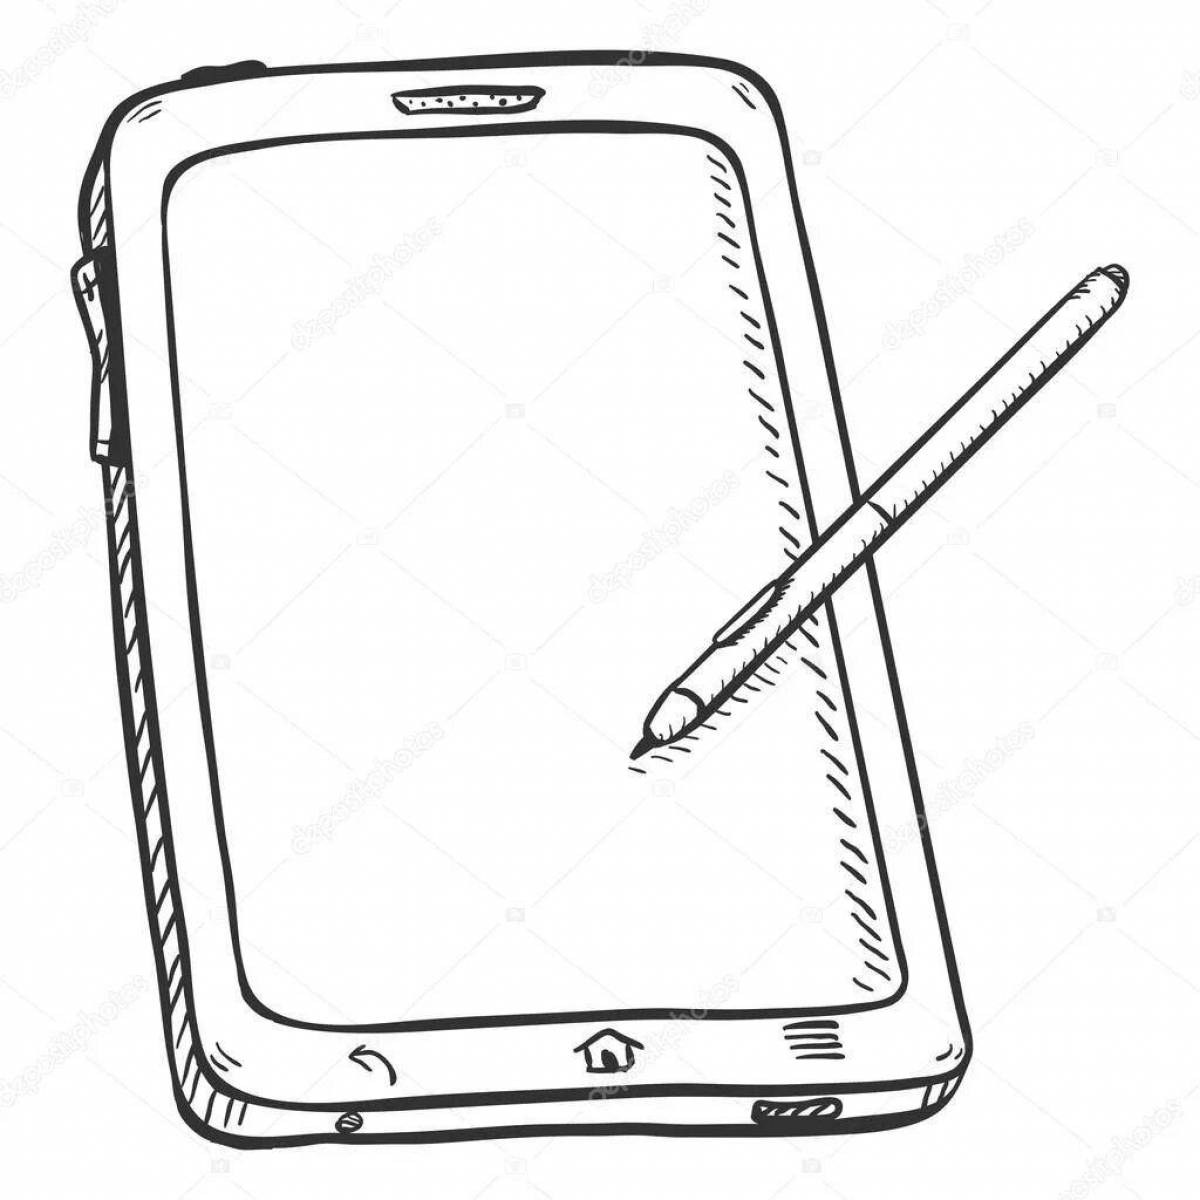 Intriguing pen tablet coloring book for beginners